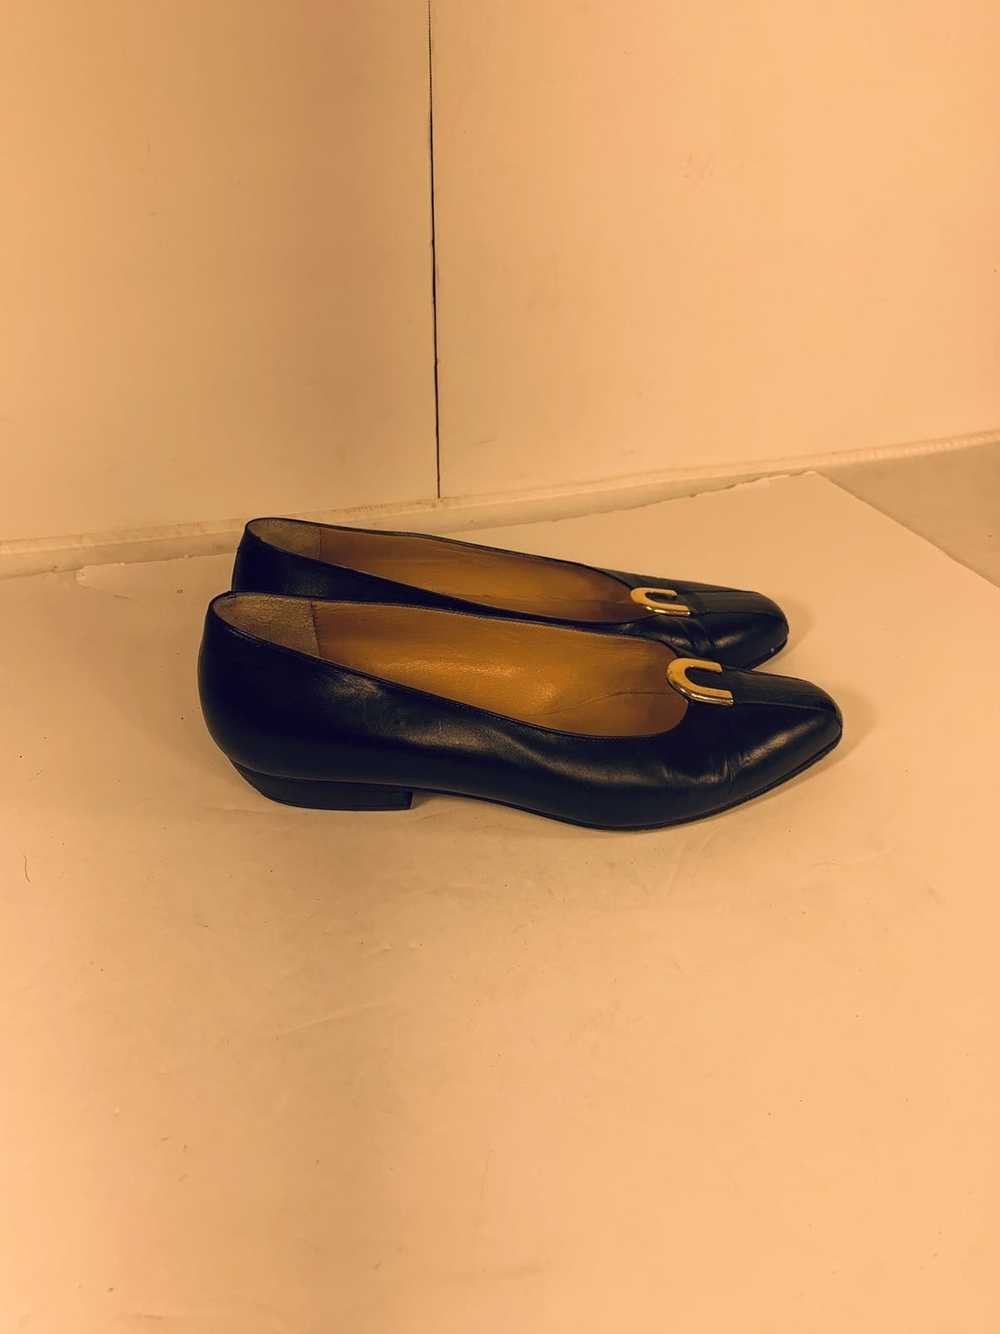 Bally Bally Slip On Loafers Flats Shoes - image 3